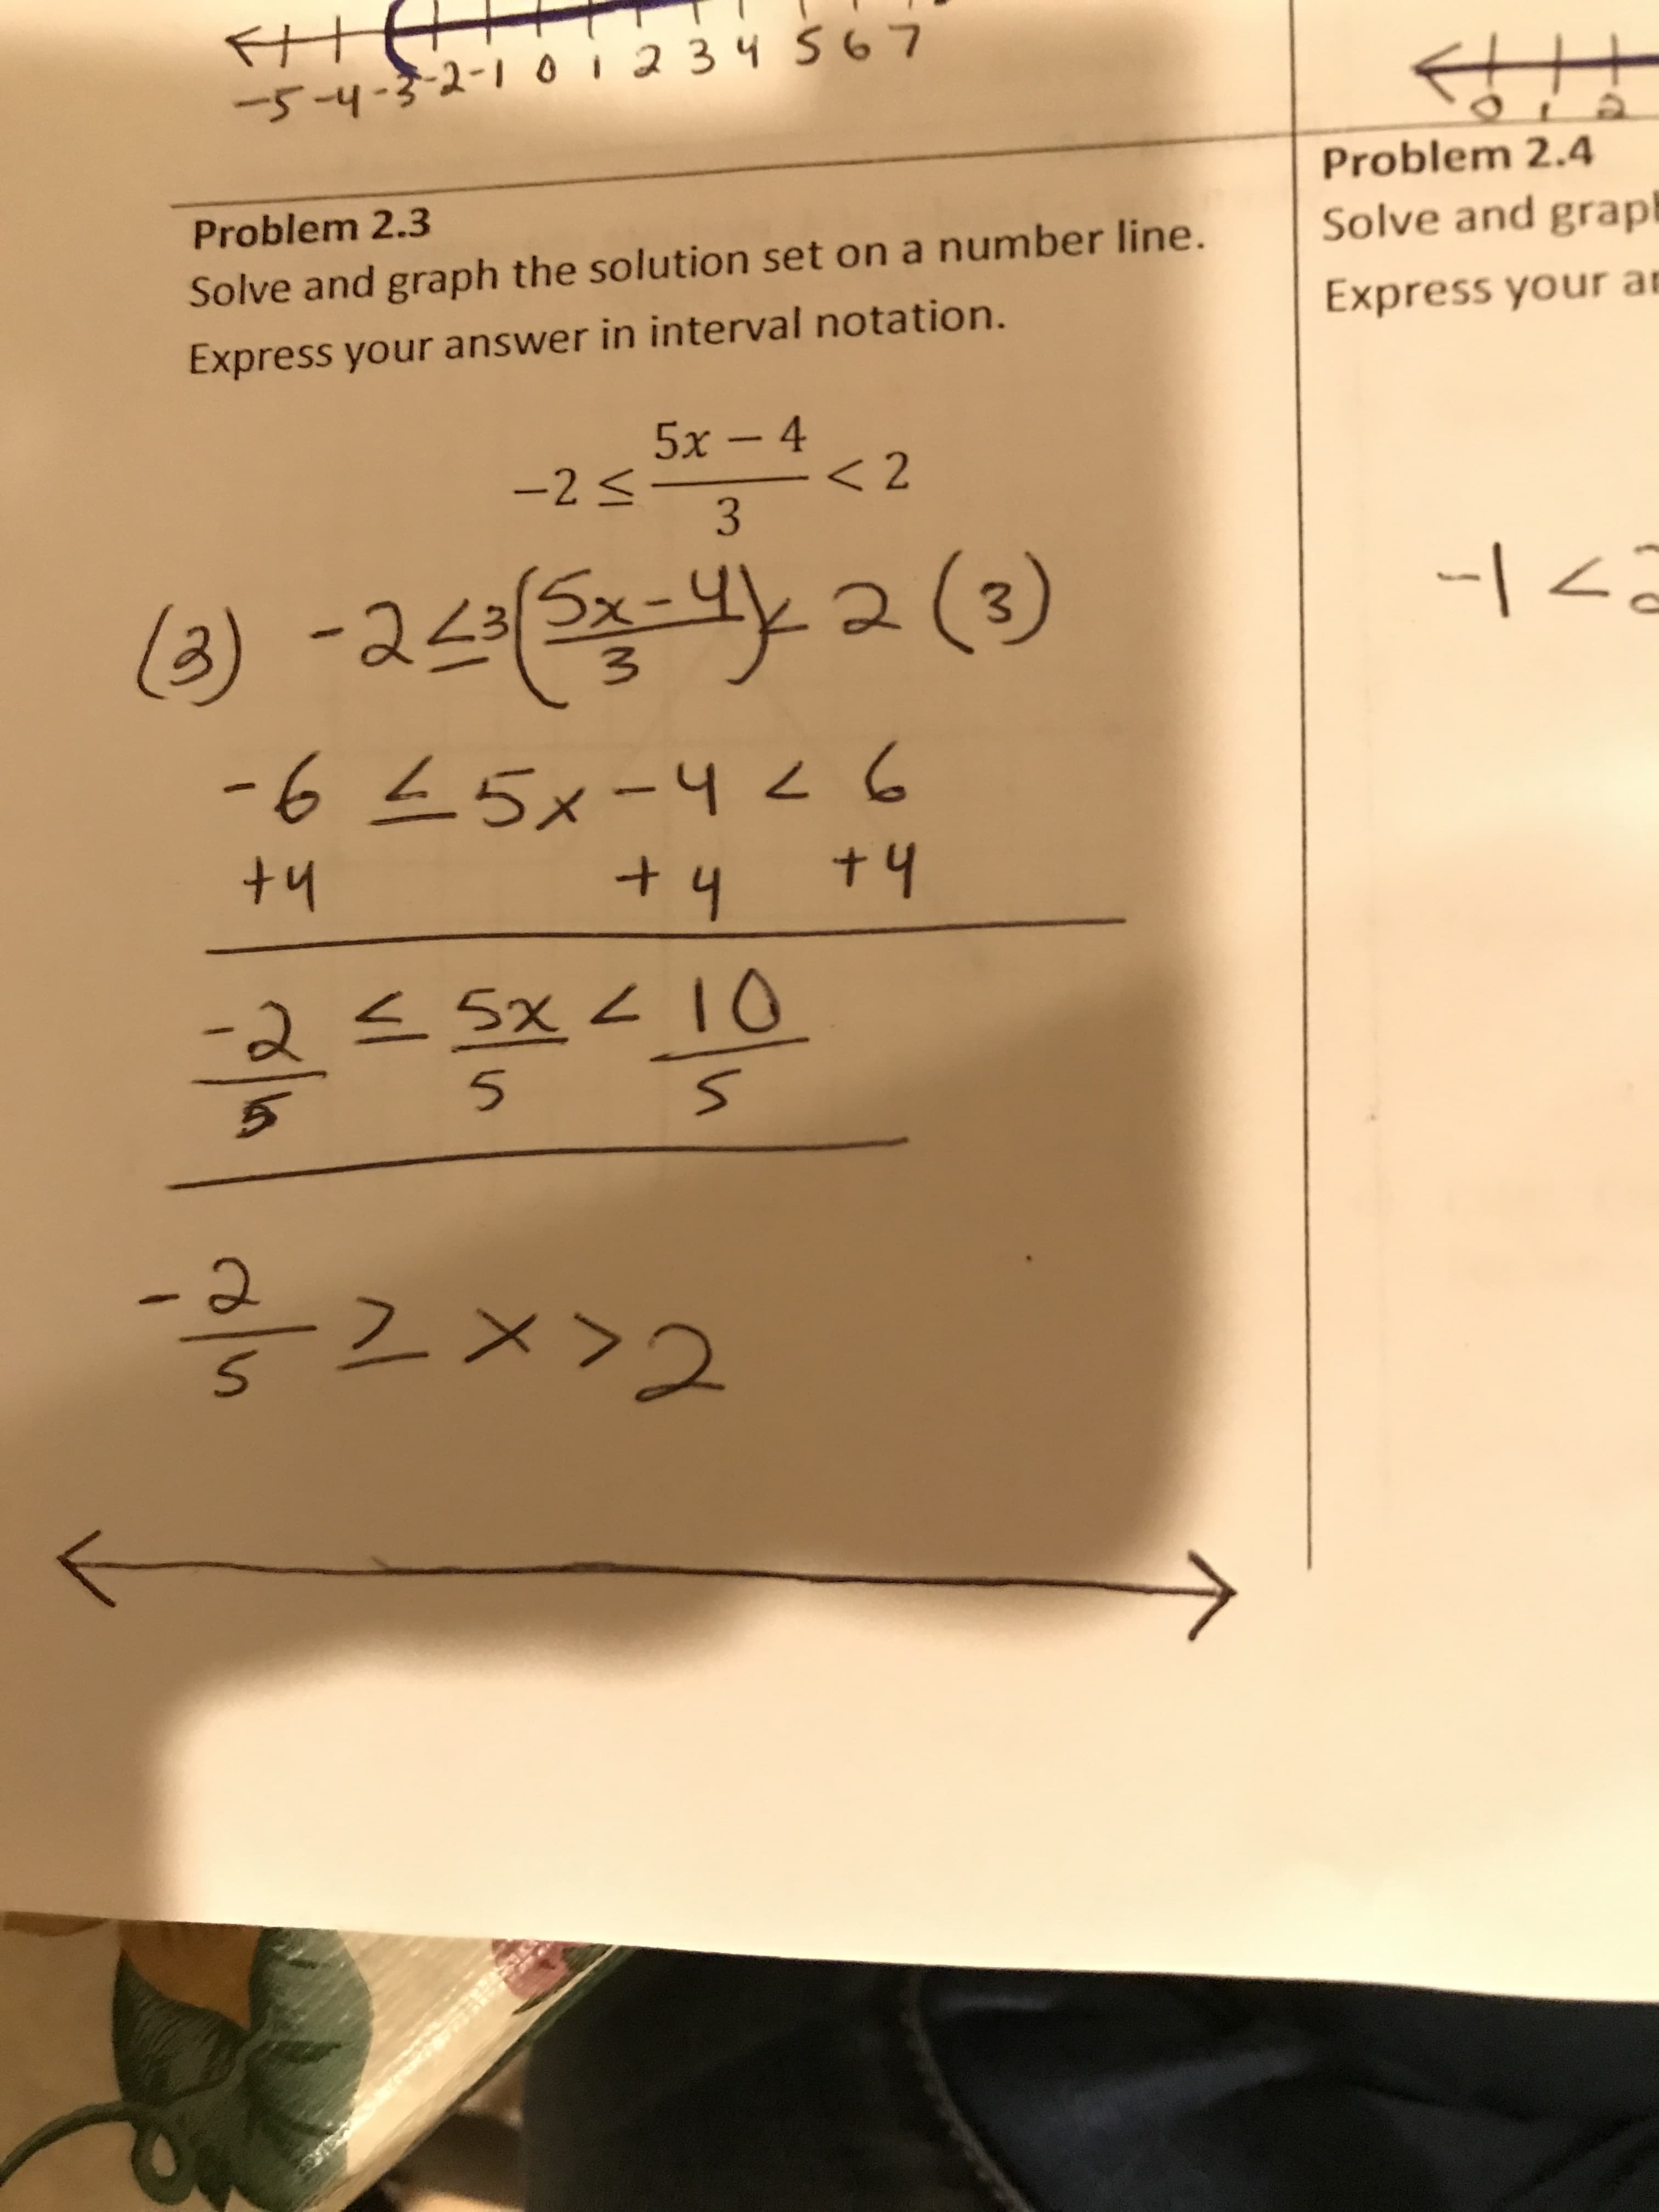 HT
-4-3-2-1 012 34S 6 7
Problem 2.4
Problem 2.3
Solve and grap
Solve and graph the solution set on a number line.
Express your an
Express your answer in interval notation.
5x-4
-2 -
< 2
3
la) -243-Y
2 (3)
-1
-645x-4Z6
+ 4
+4
+4
-25x 4IO
- Q
2
